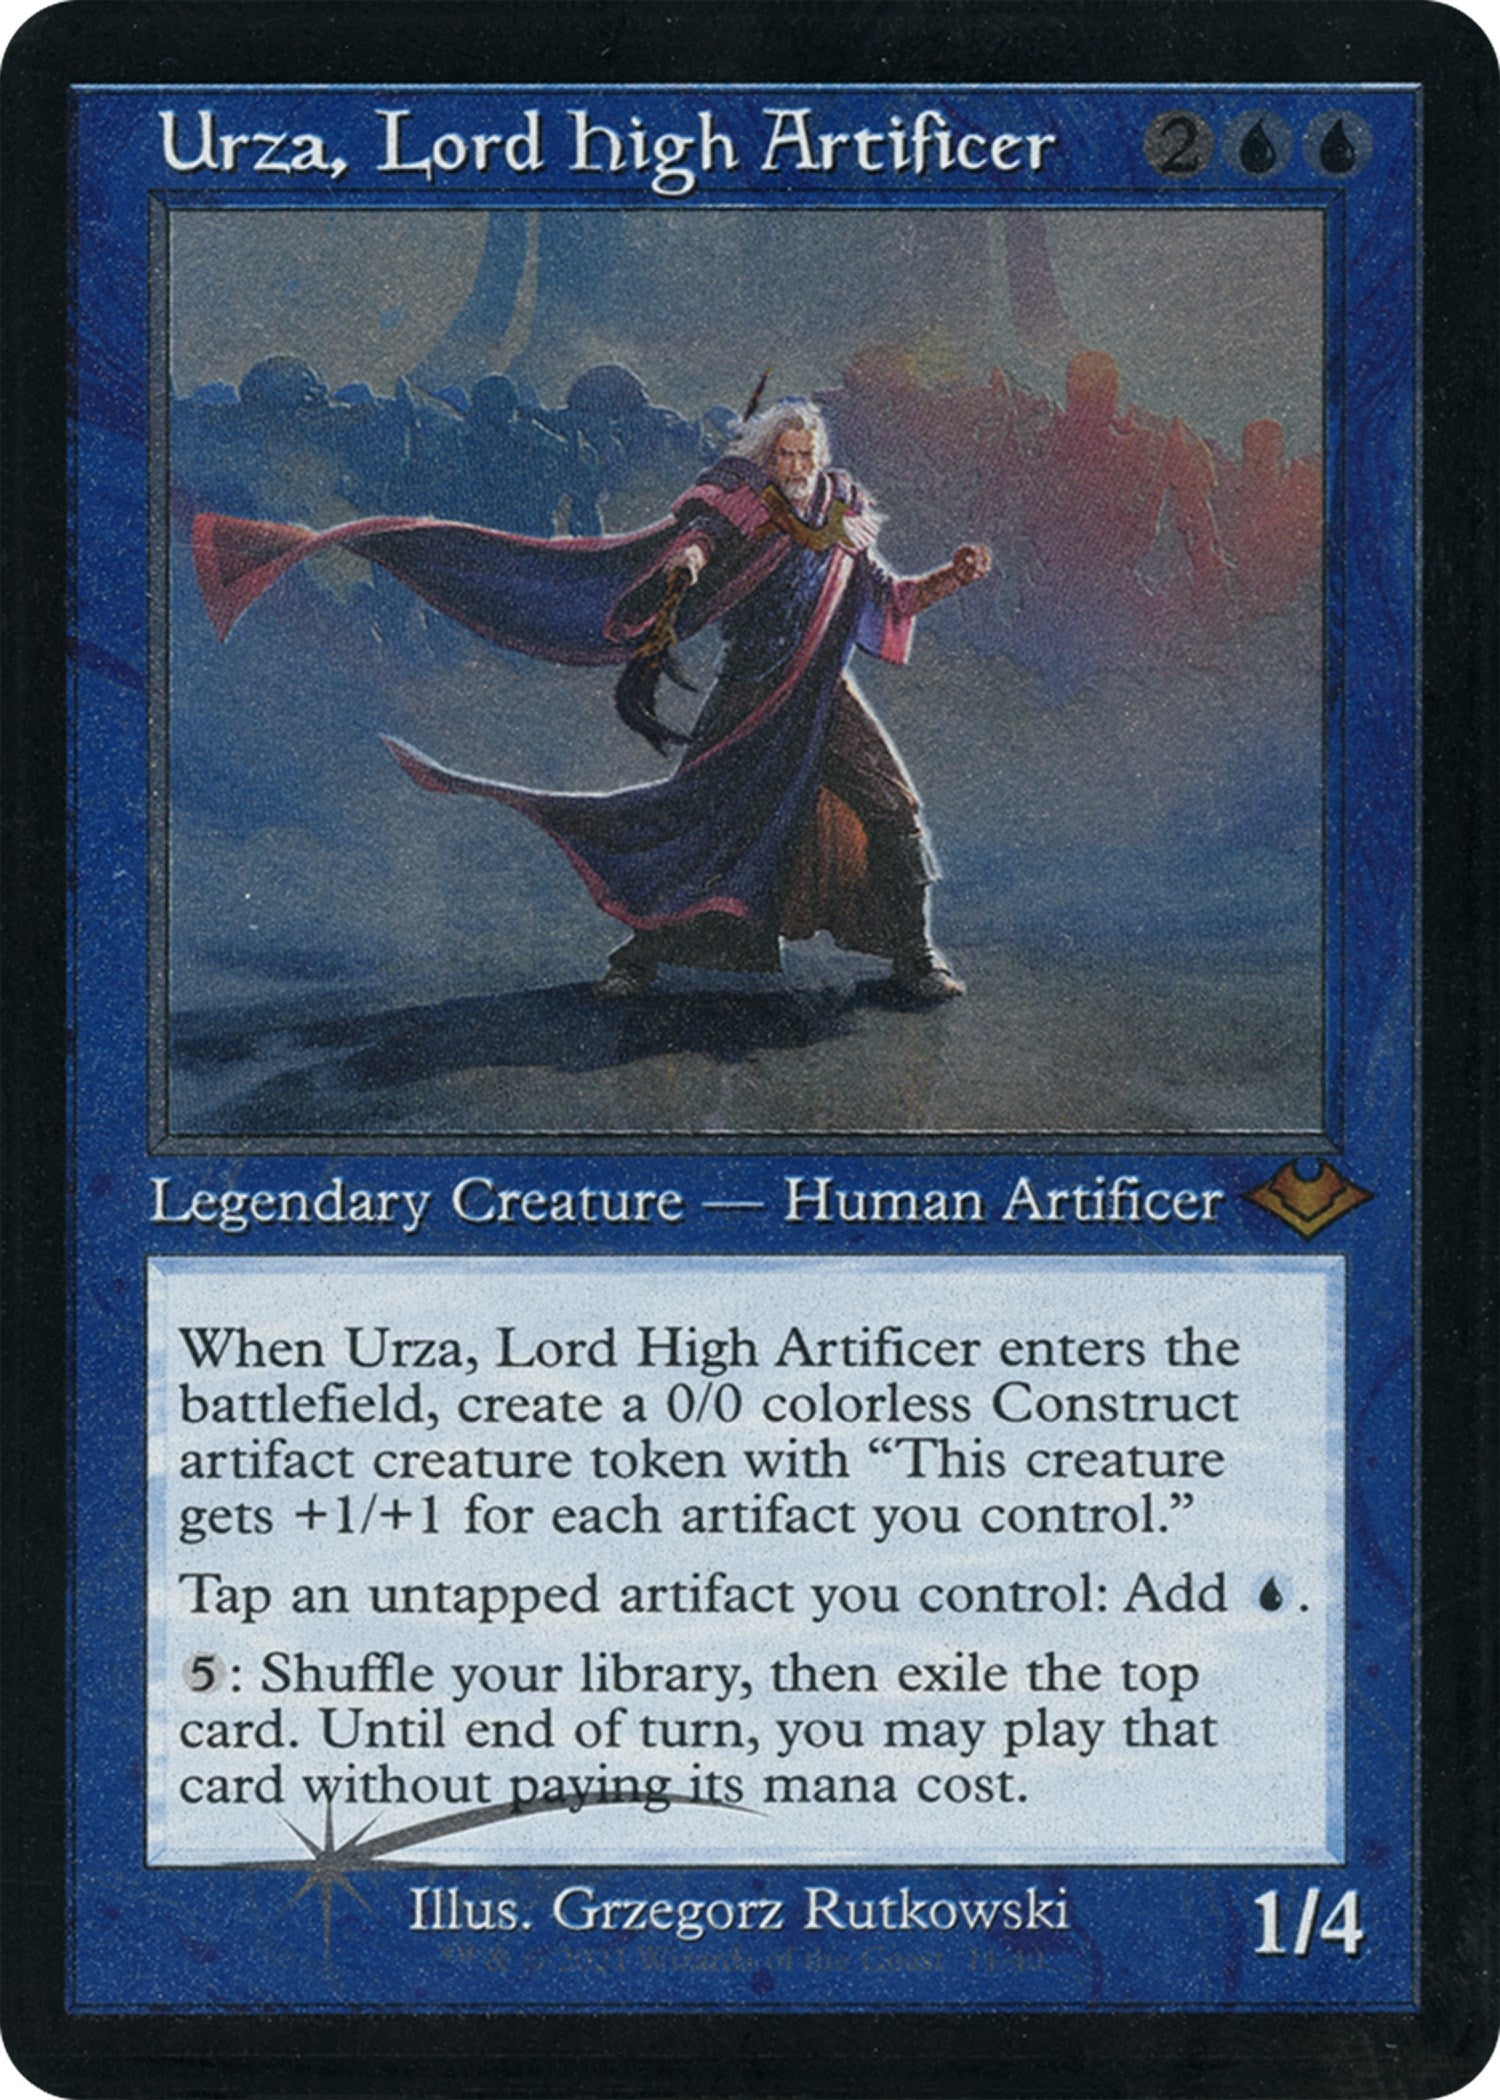 Urza, Lord High Artificer (Retro Foil Etched) [Modern Horizons]